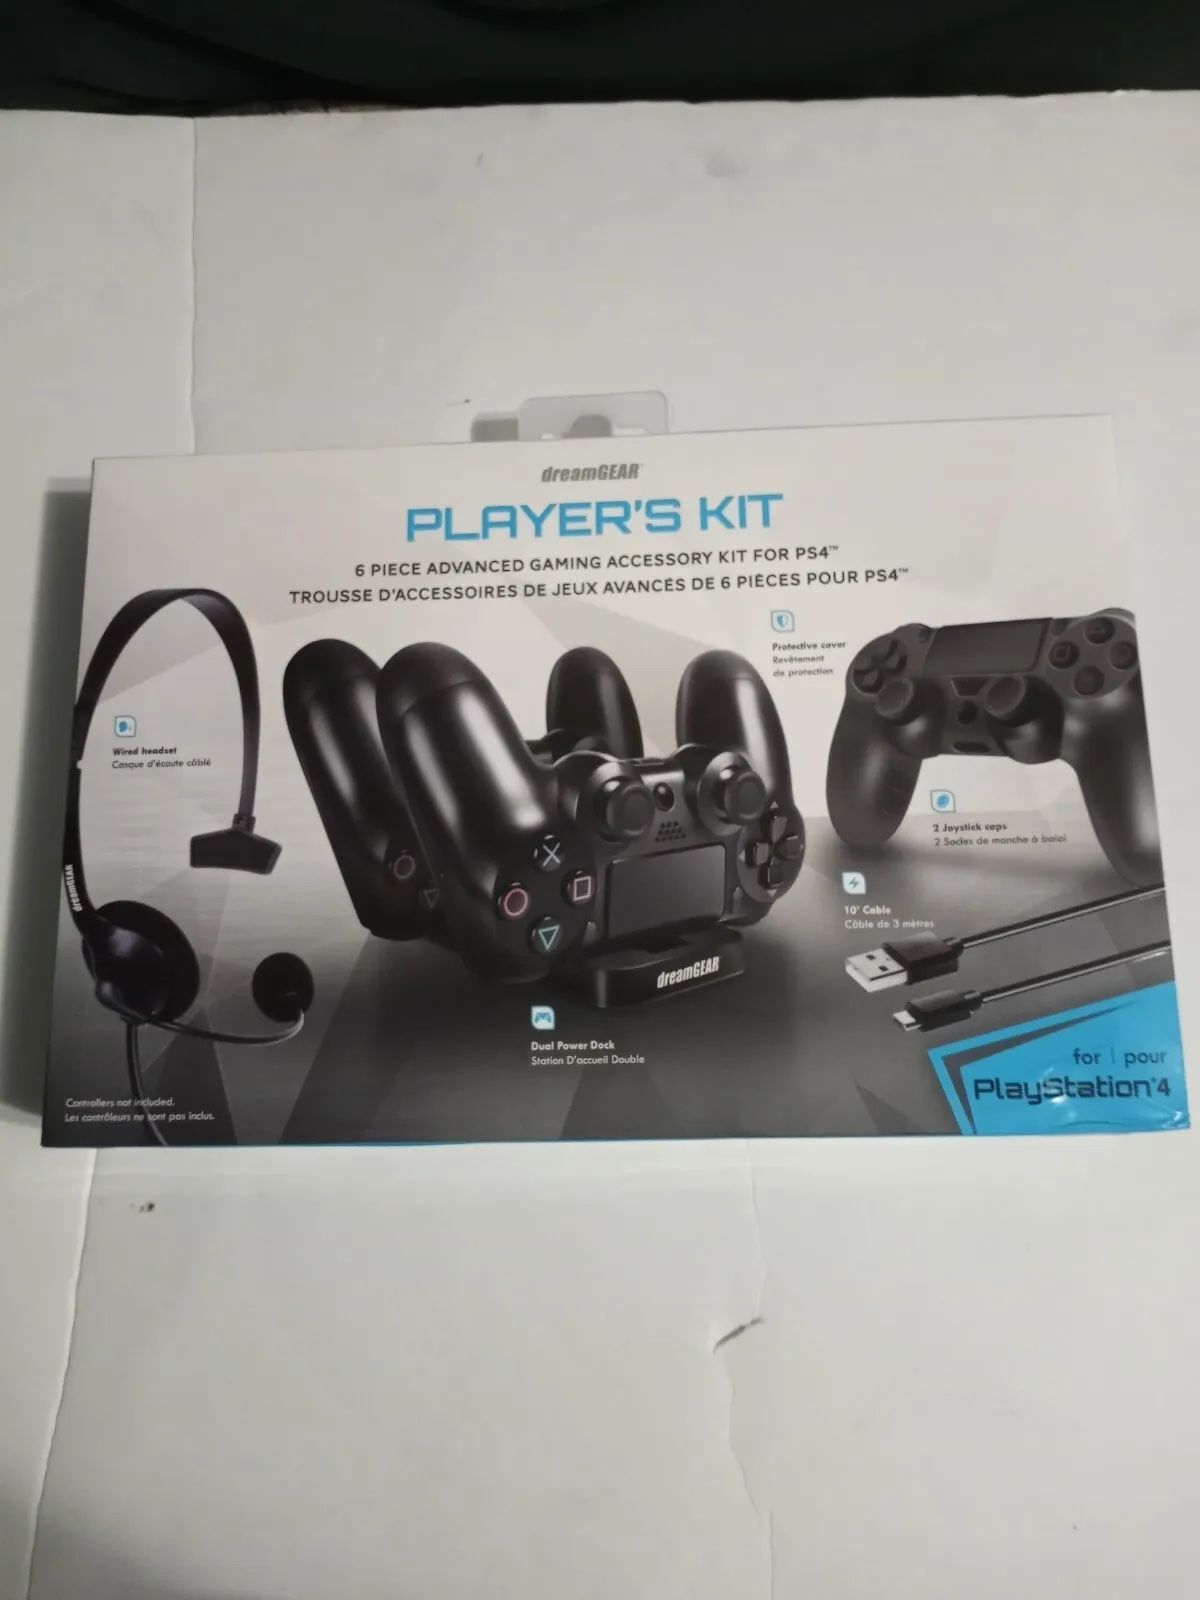 DreamGear 6 Piece Player's Kit for PS4